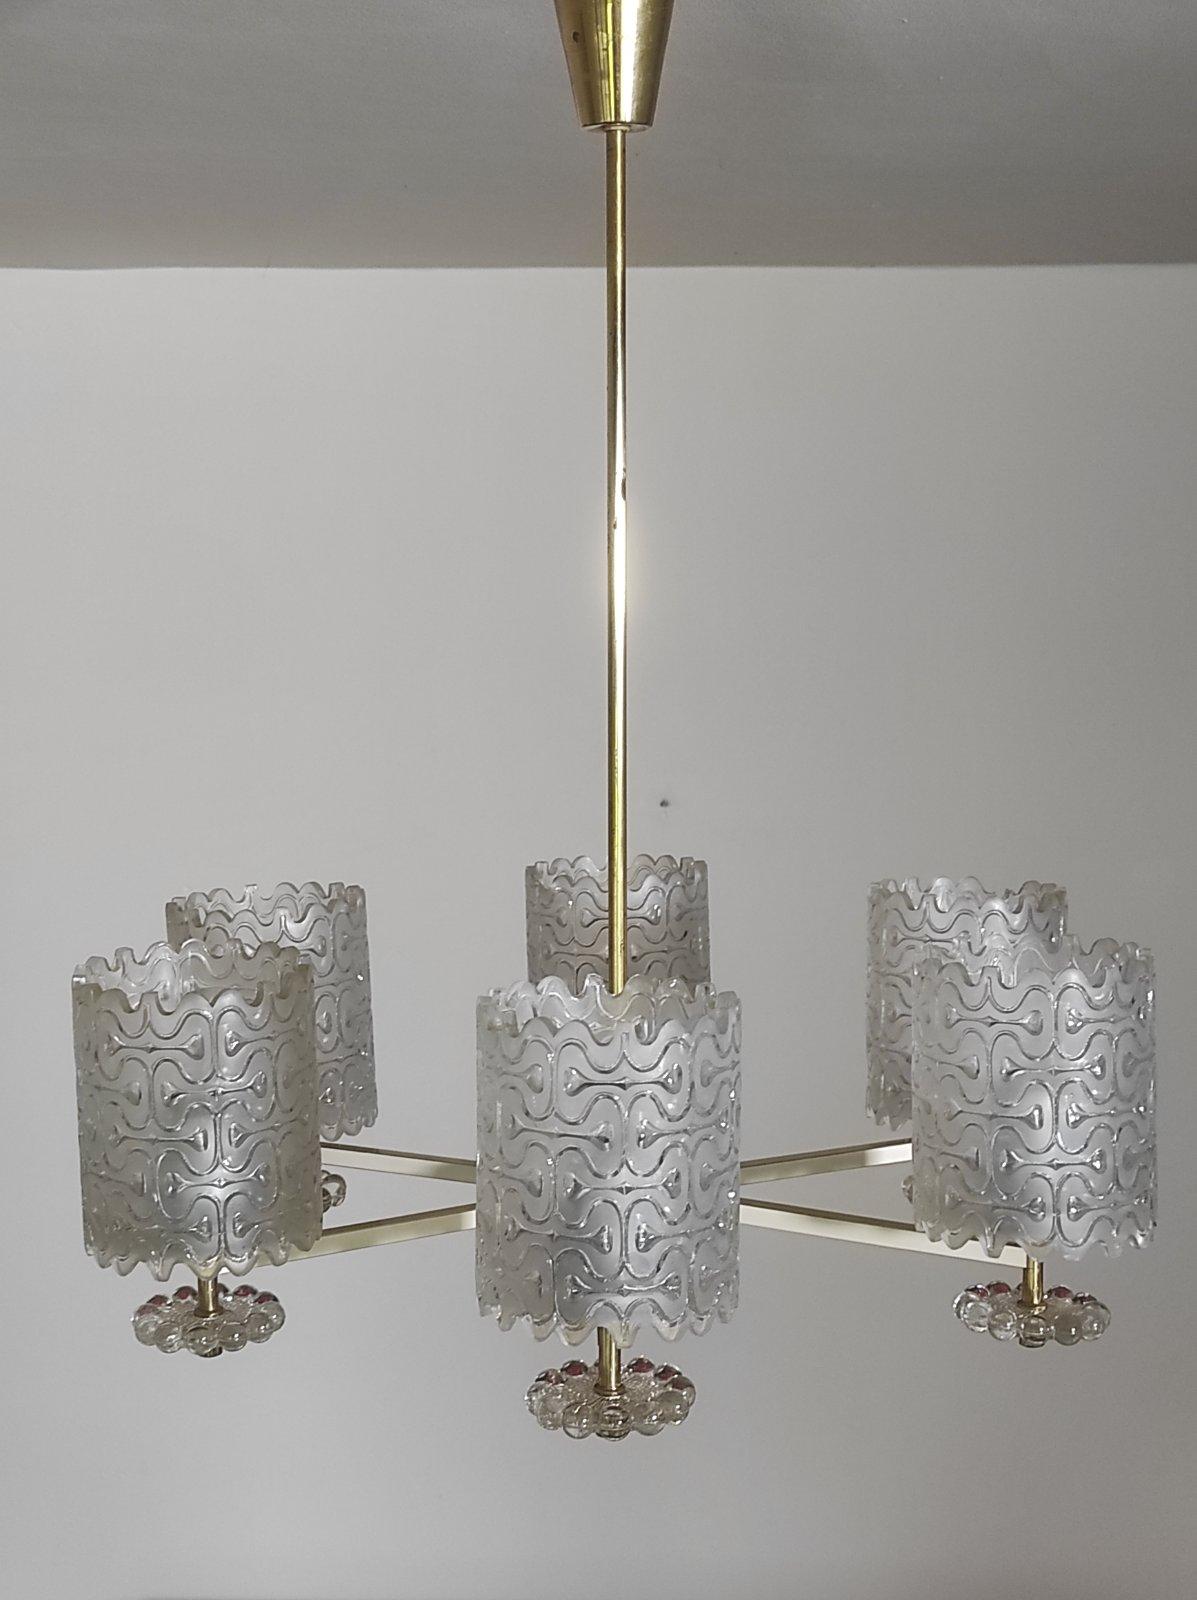 Austrian Brass and Glass Vintage Chandelier 1960s For Sale 5